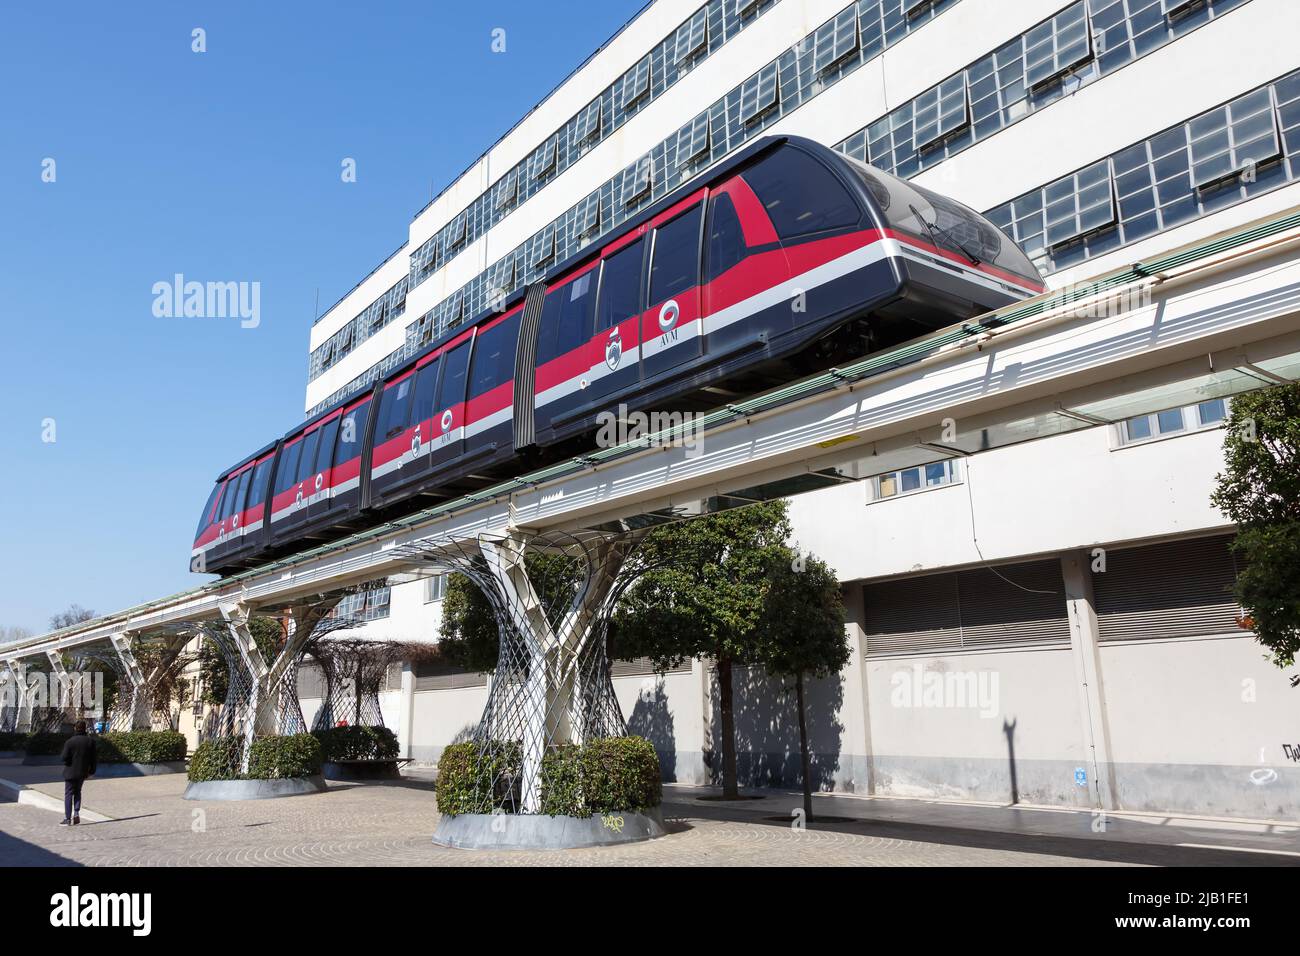 Venice, Italy - March 20, 2022: People Mover Venezia at Piazzale Roma public transport in Venice, Italy. Stock Photo